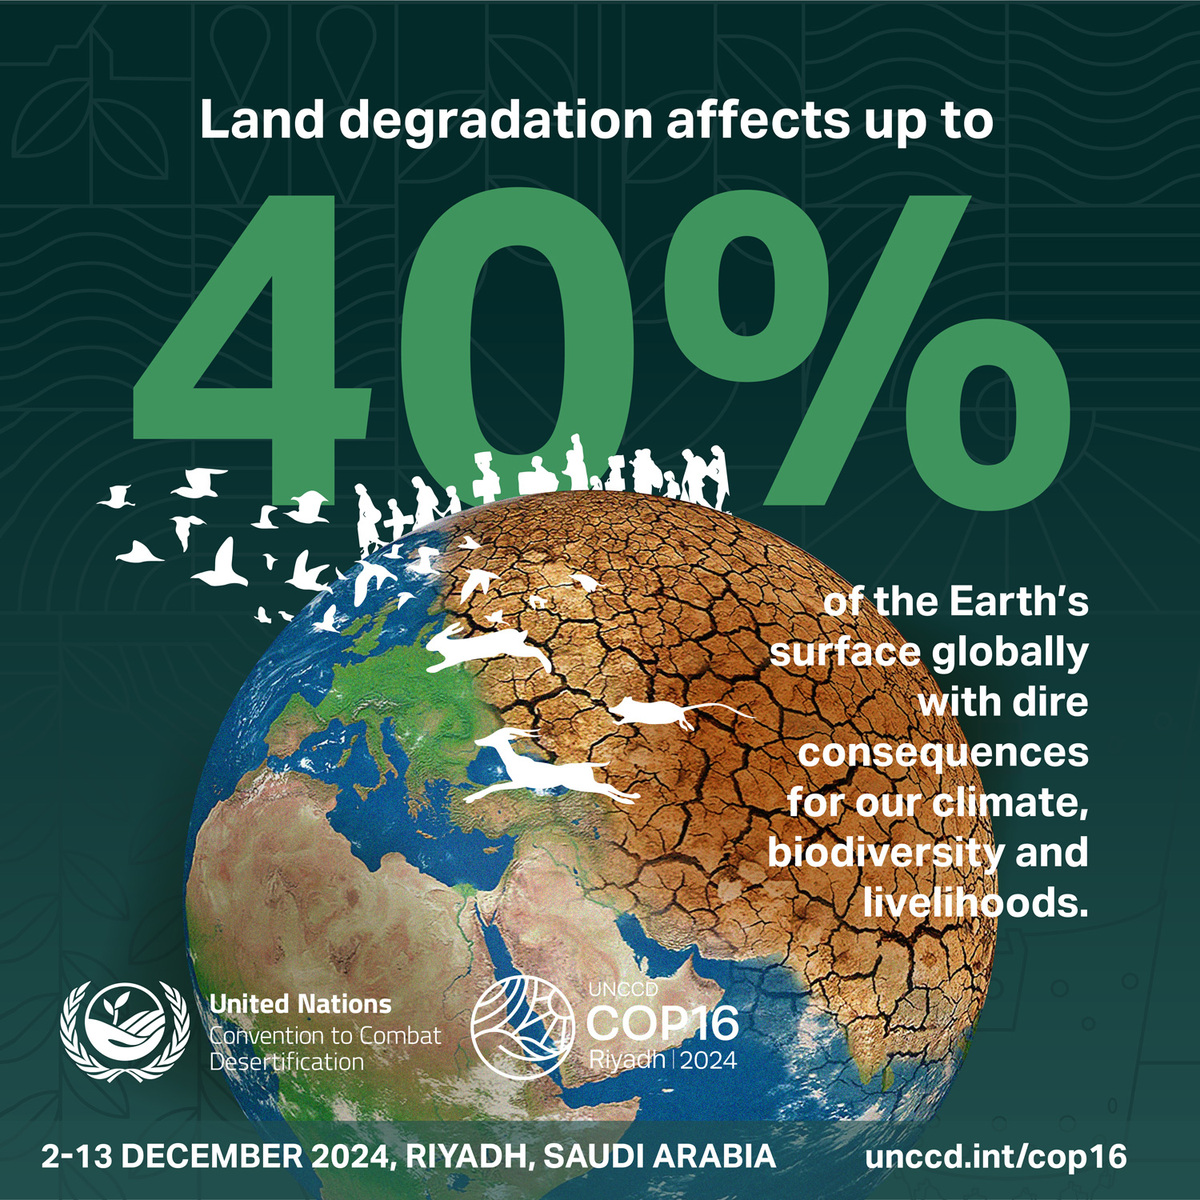 Land degradation affects us all, threatening climate, biodiversity, and our very livelihoods. By 2030, we might need to restore 1.5 billion hectares. Join us at #UNCCDCOP16 to advocate for an urgent, achievable solution for our planet. #UNited4Land #GenerationRestoration